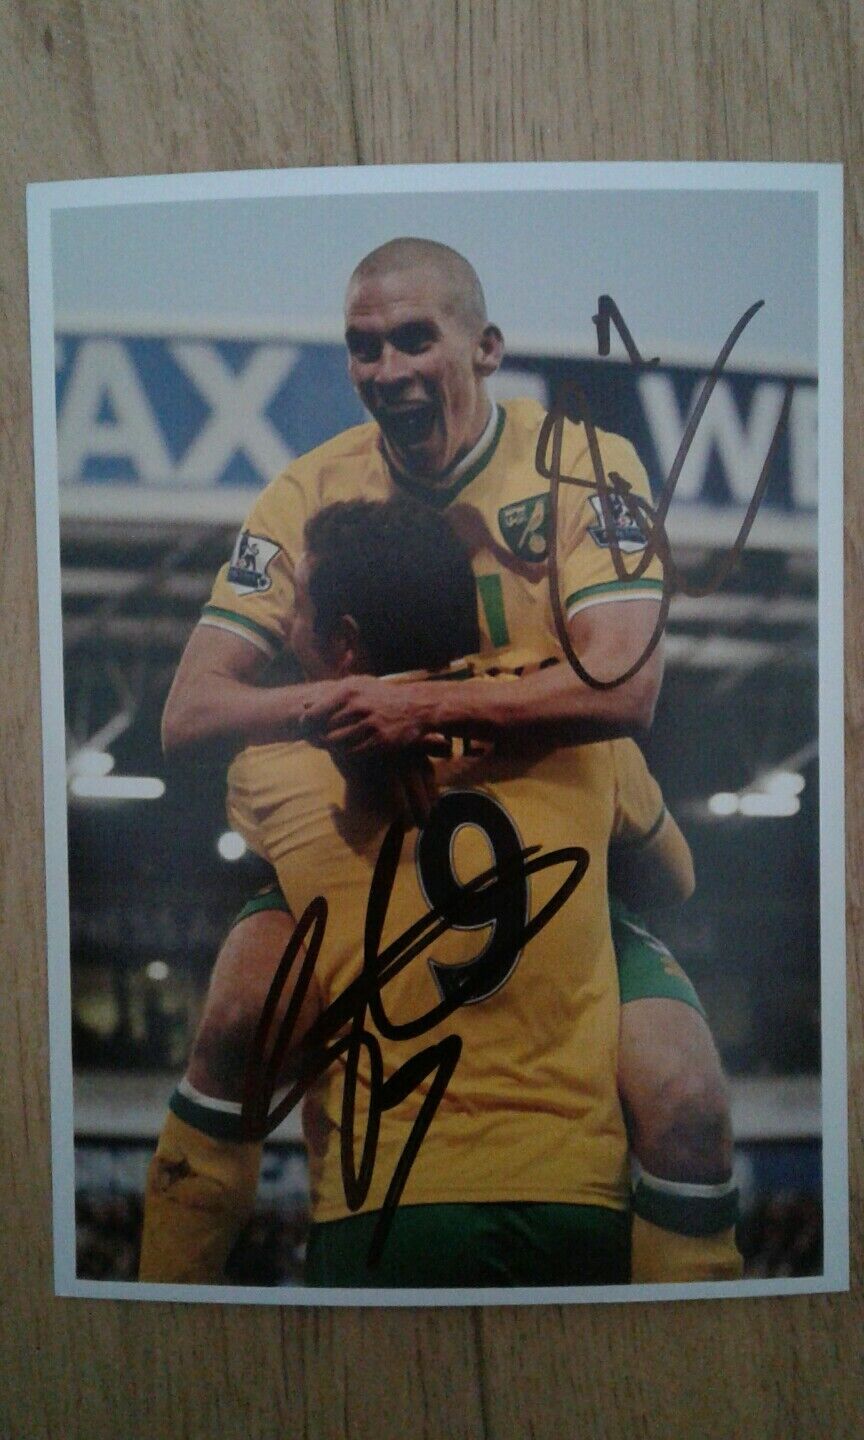 Holt Morrison Norwich City Hand Auto bordered Signed 7x5 Safety and trust photo Tucson Mall